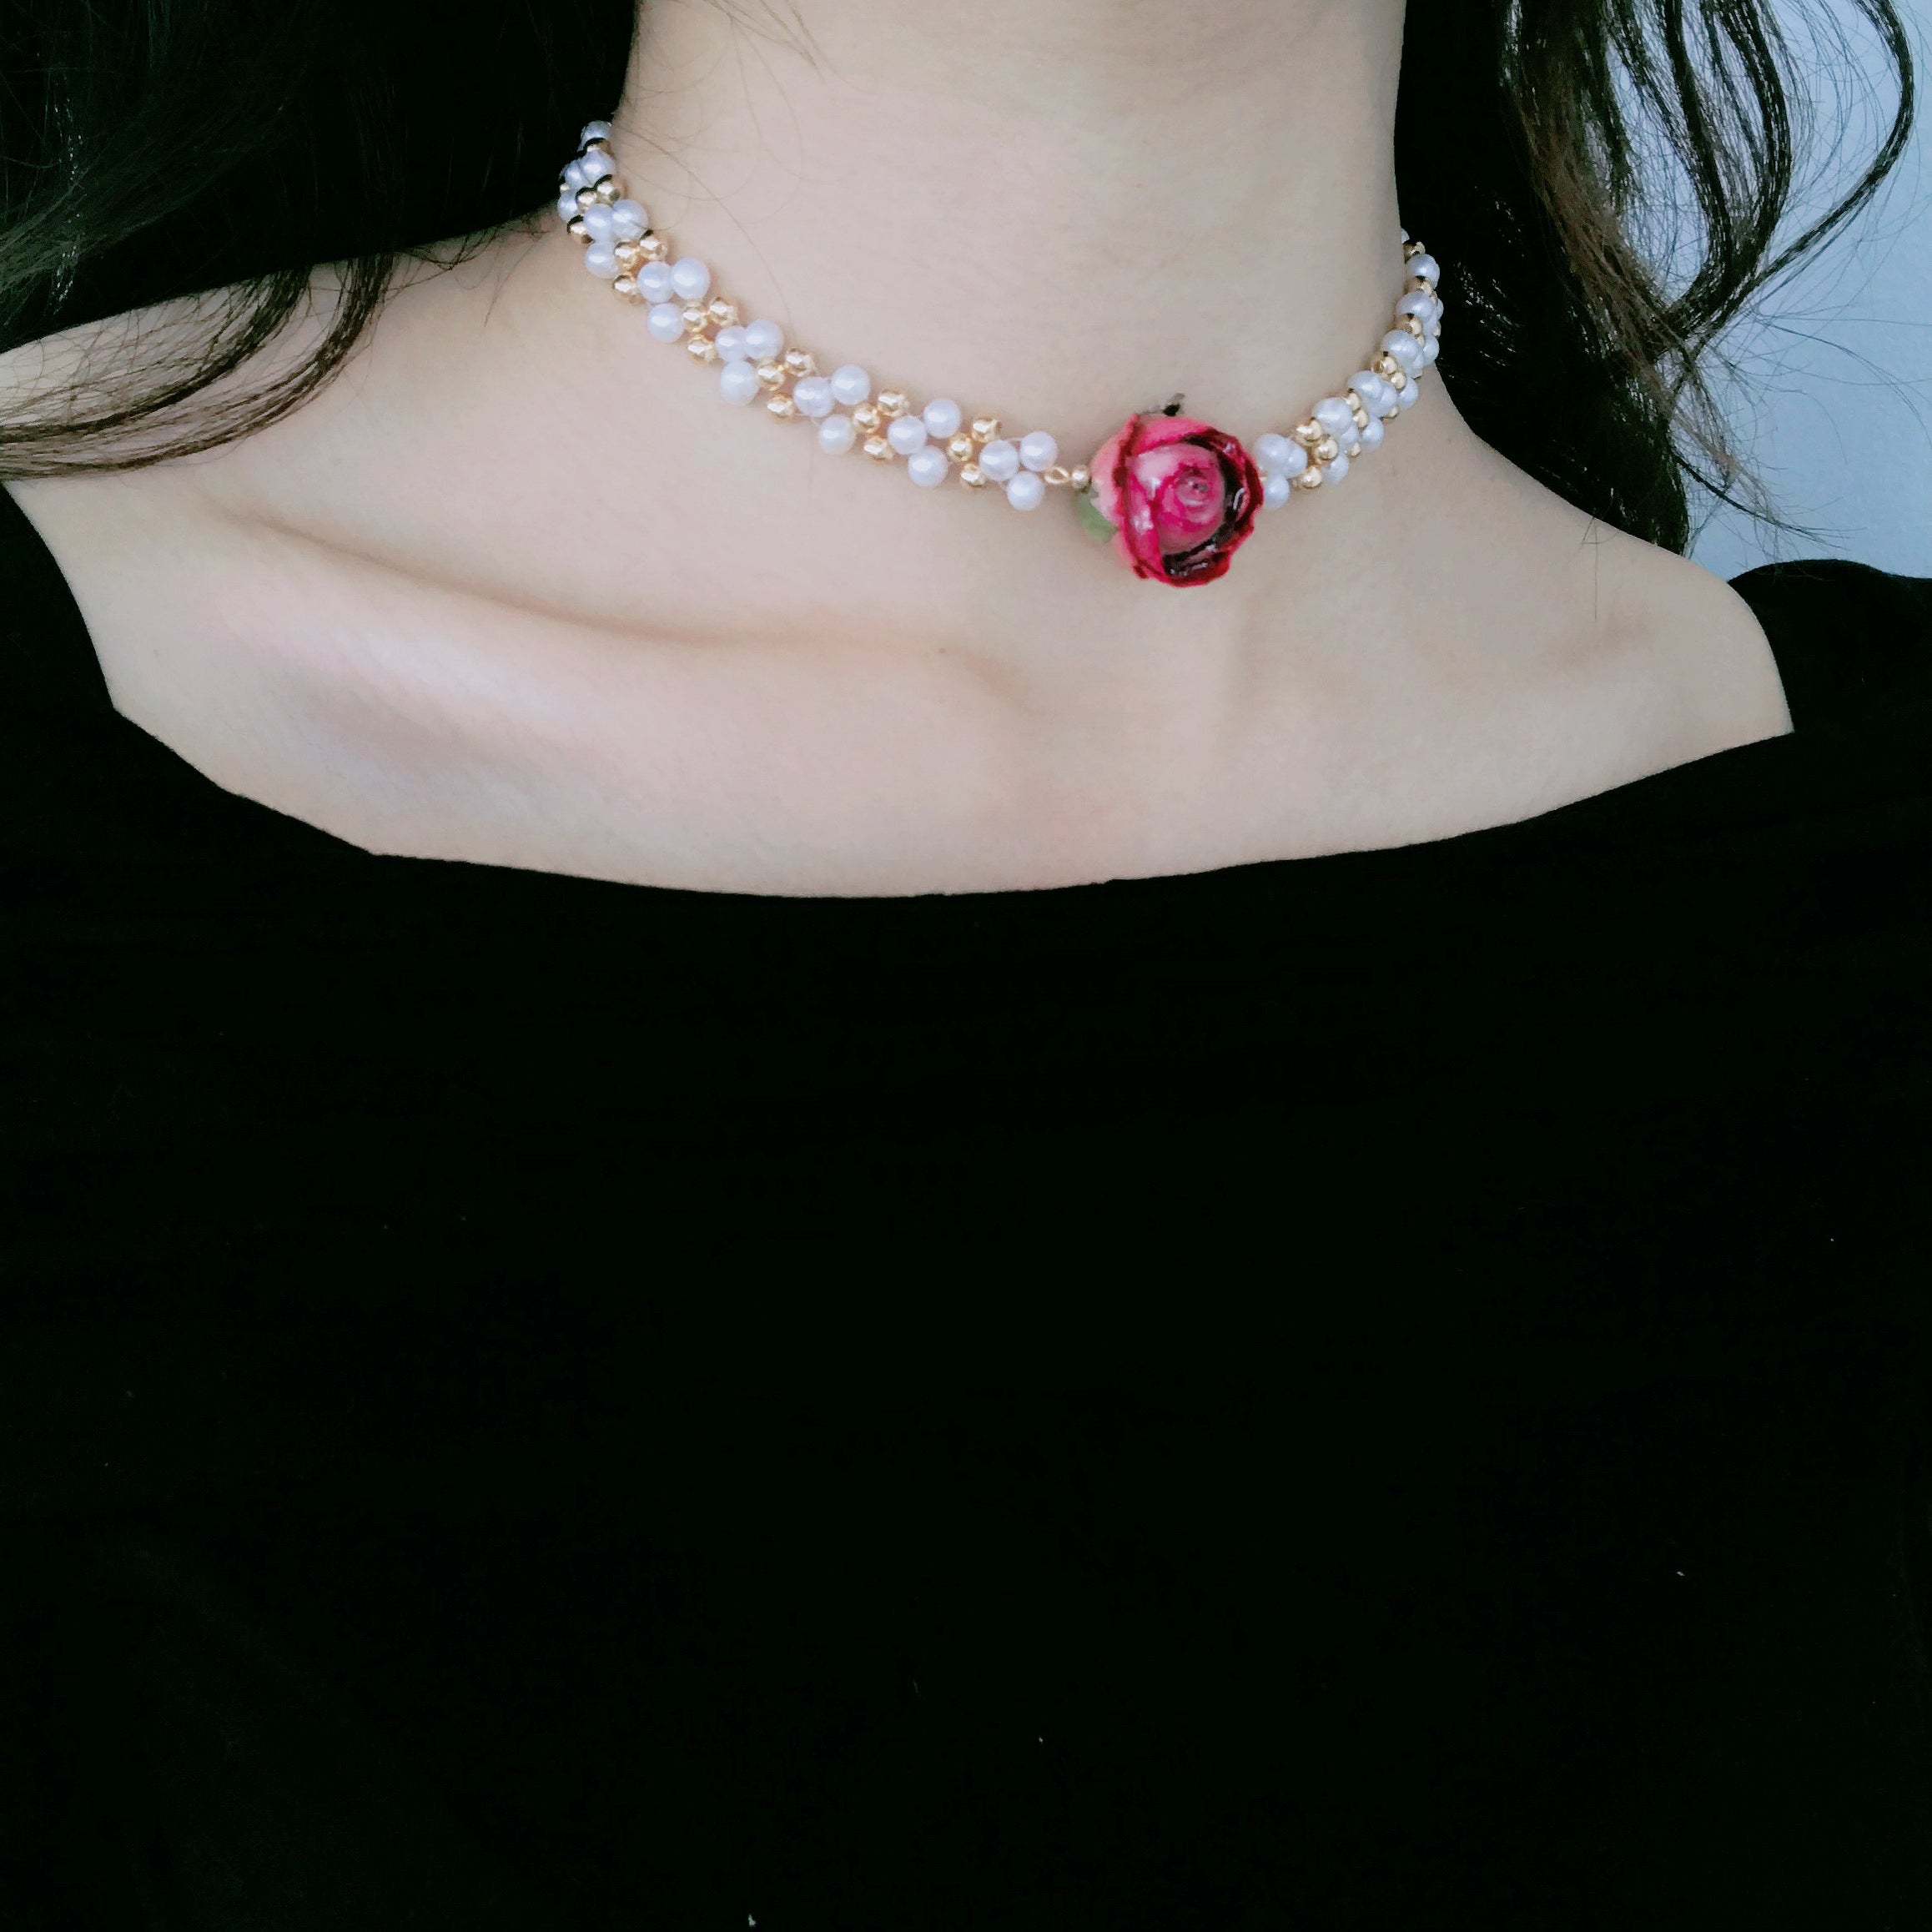 *REAL FLOWER* Bella Rosa Braided Freshwater Pearl Choker Necklace w/Pink Rose